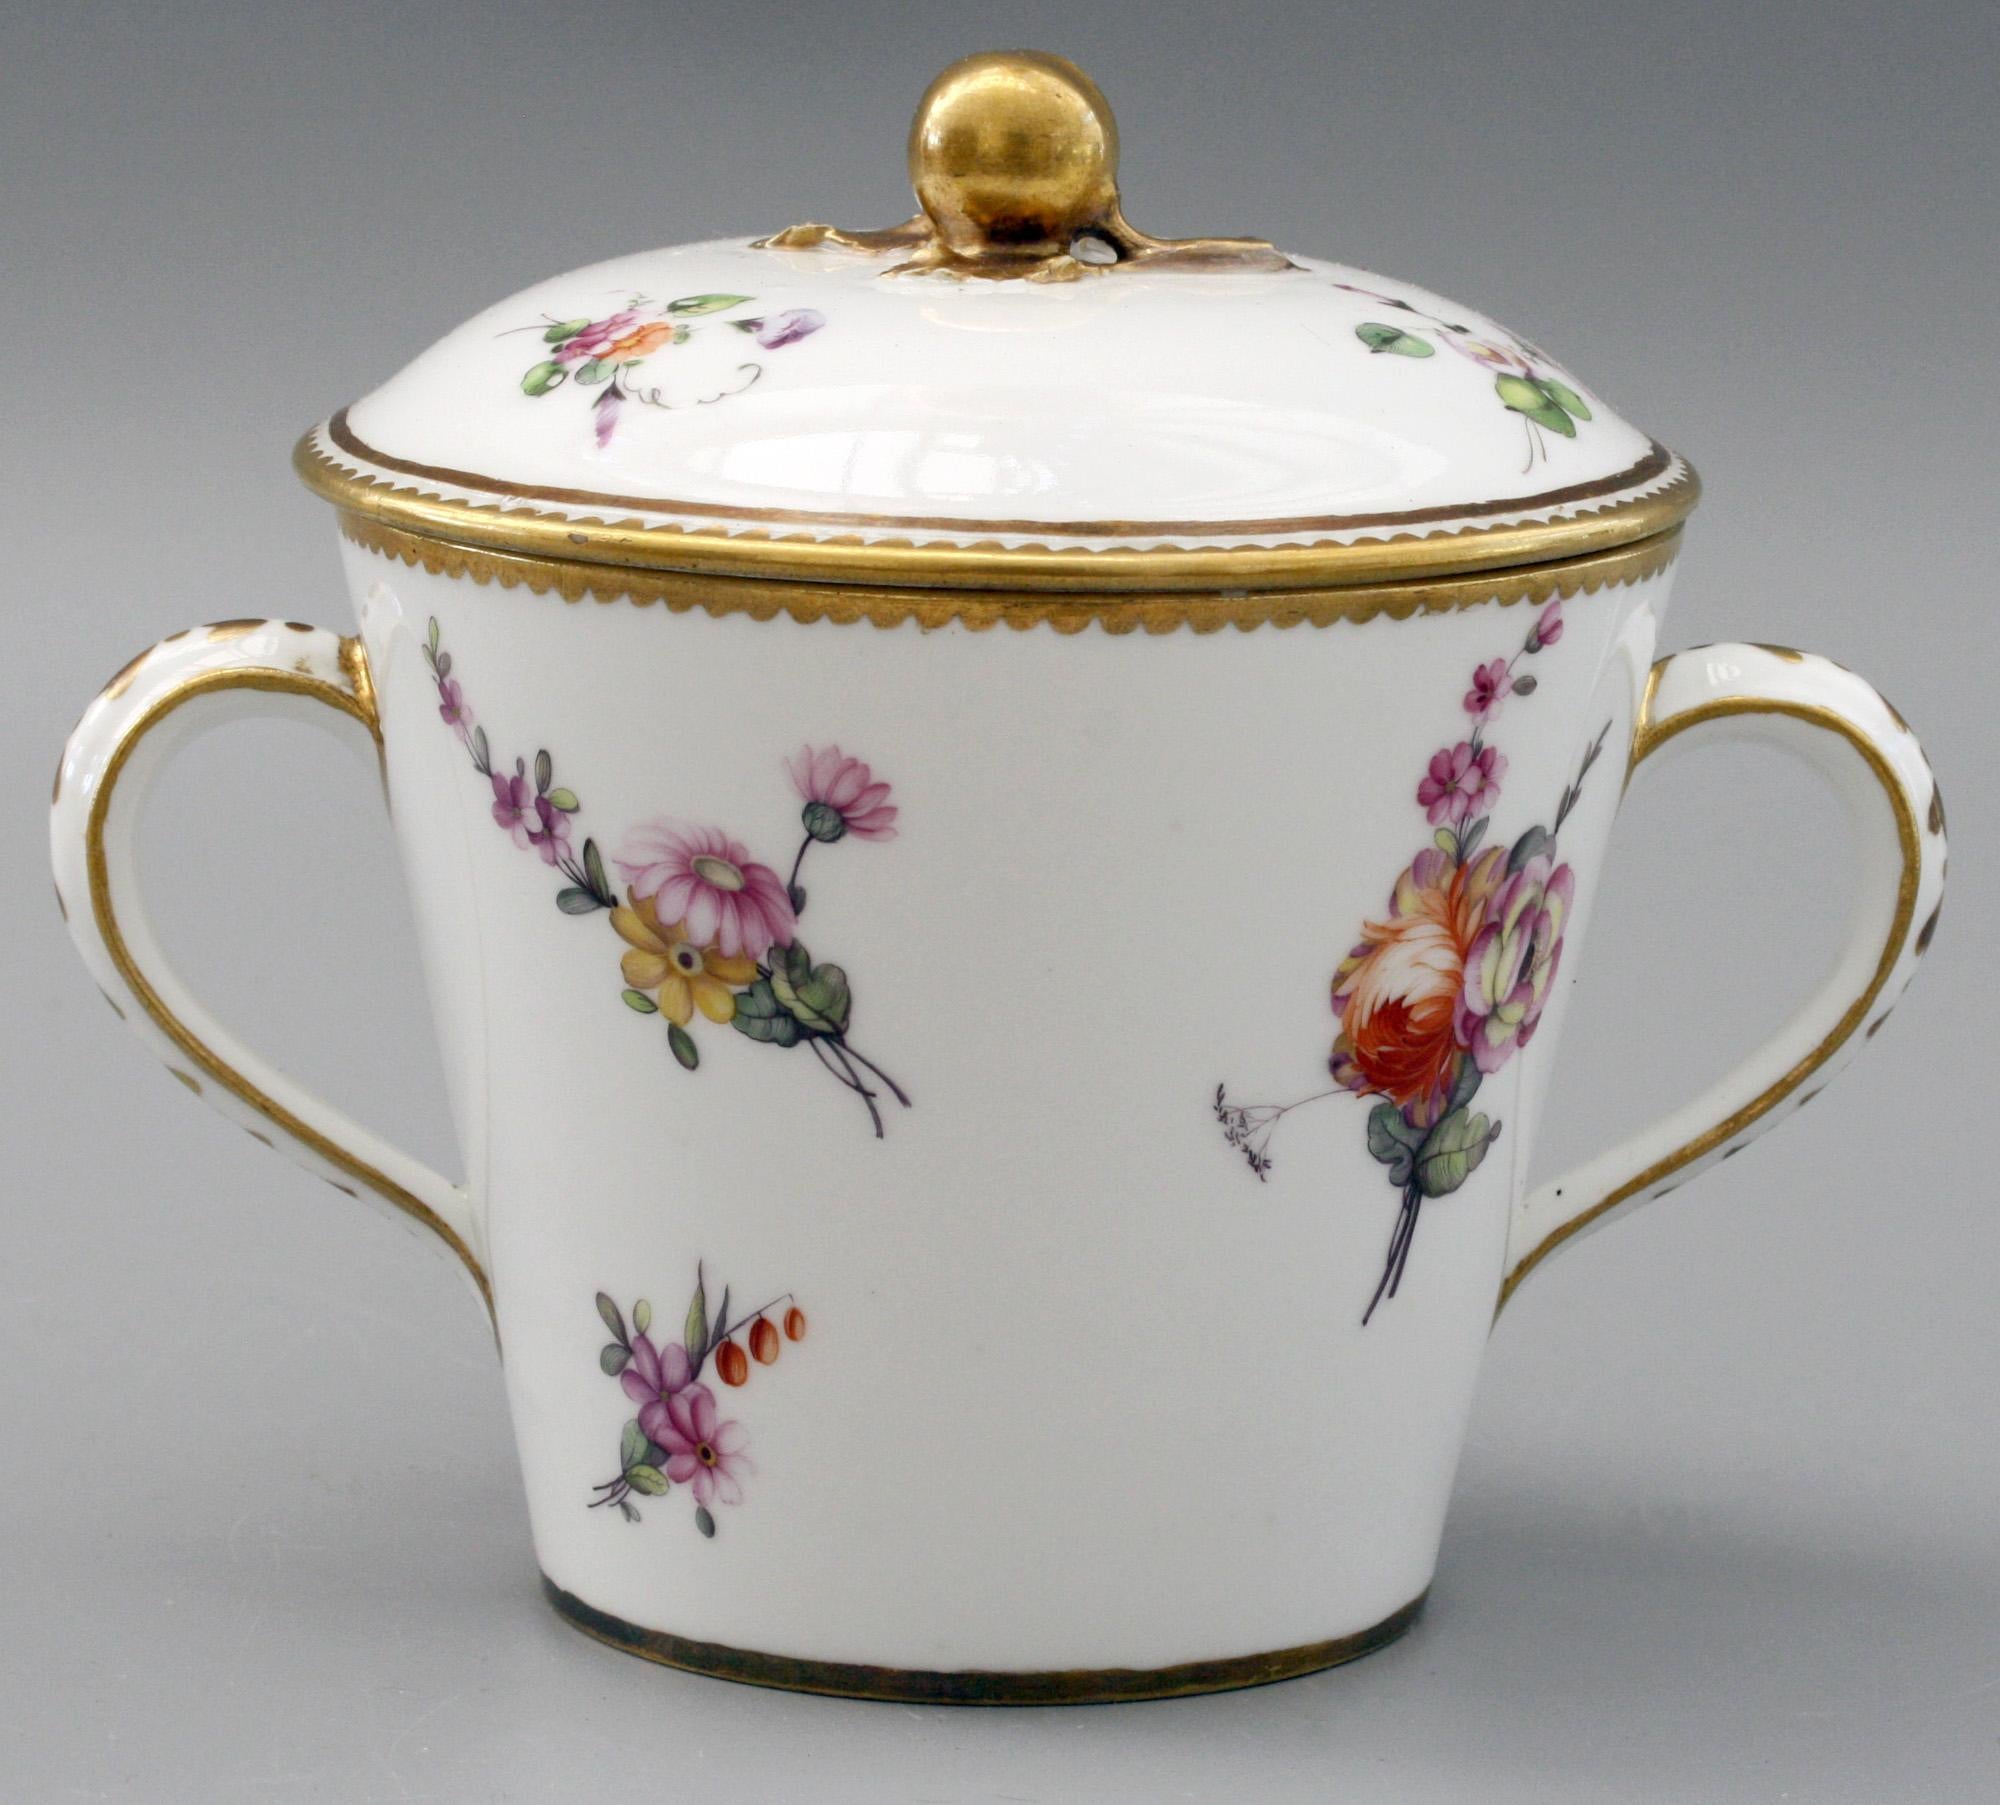 An exceptional three part antique French Sèvres porcelain twin handled lidded chocolate cup with large saucer stand hand painted with flowers by Dusolle (1768-1774) and date marks for 1772. The conical shaped cup is applied with ear shaped handles